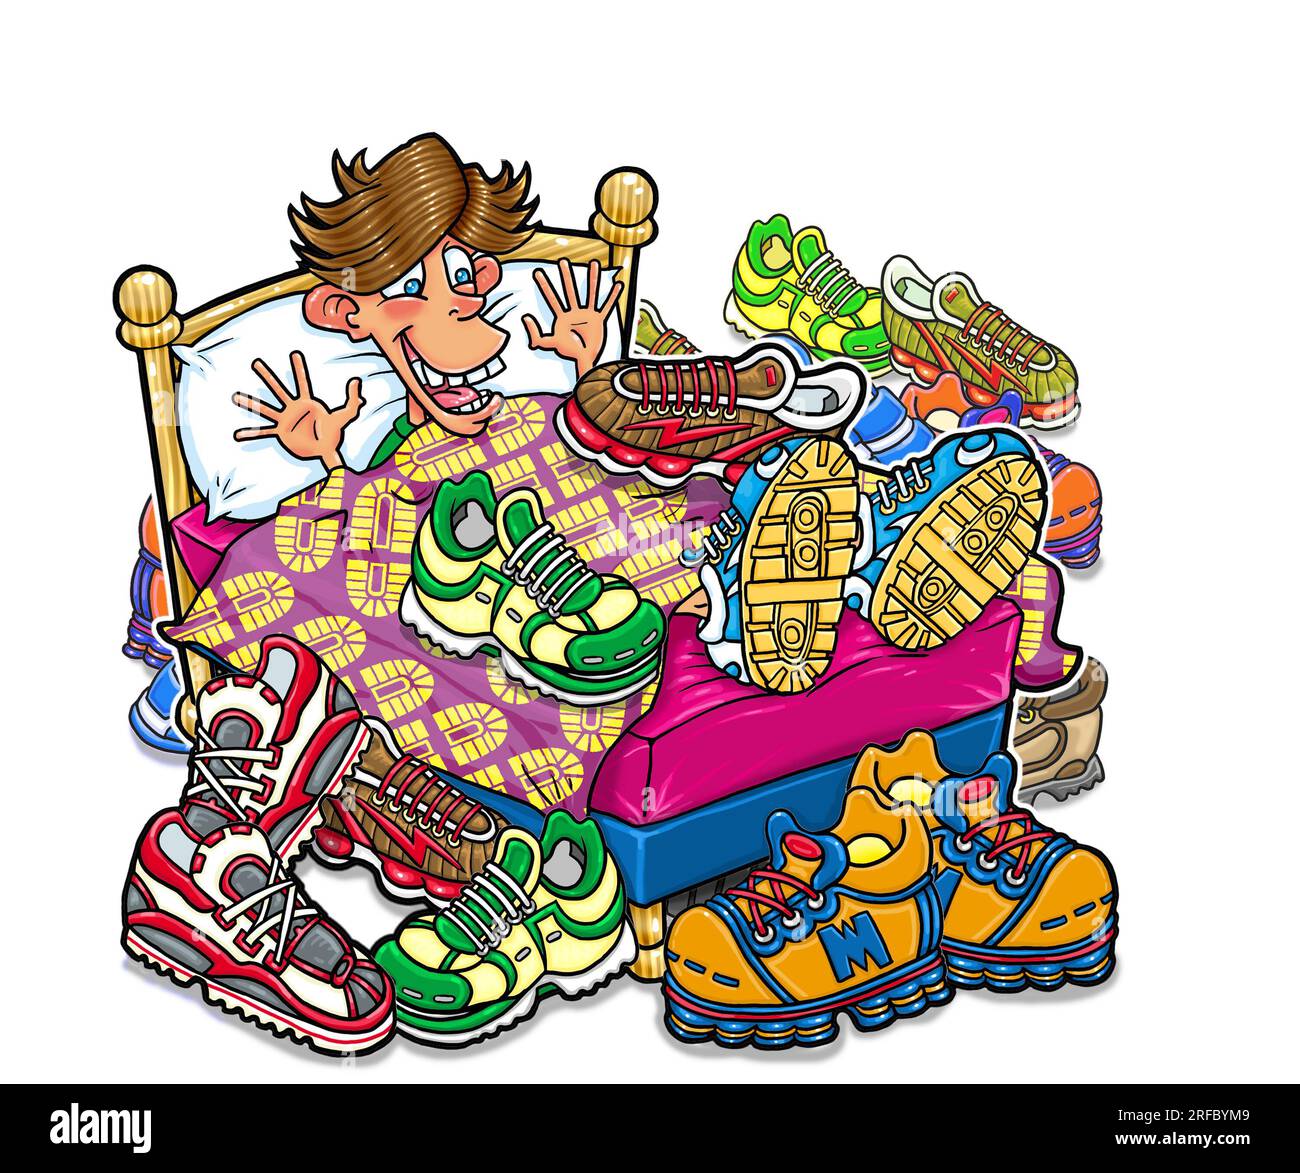 Boy in bed, opening his presents to find lots of trainers, trainer collector, sneaker collector, sneakerhead, hobby, clothing, fashion, concept art Stock Photo